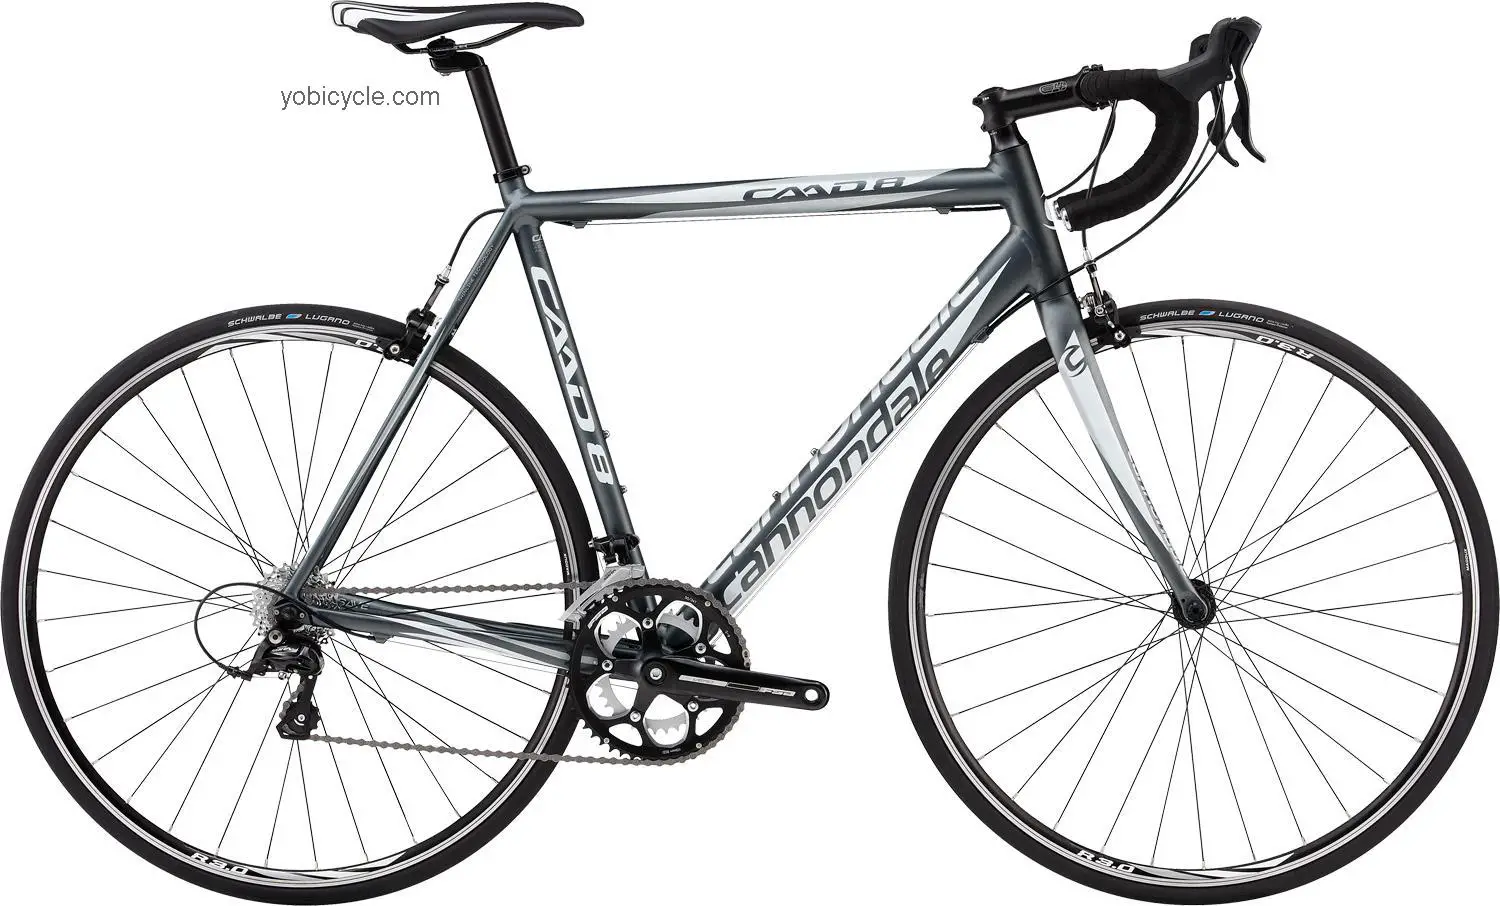 Cannondale CAAD8 7 Sora 2013 comparison online with competitors